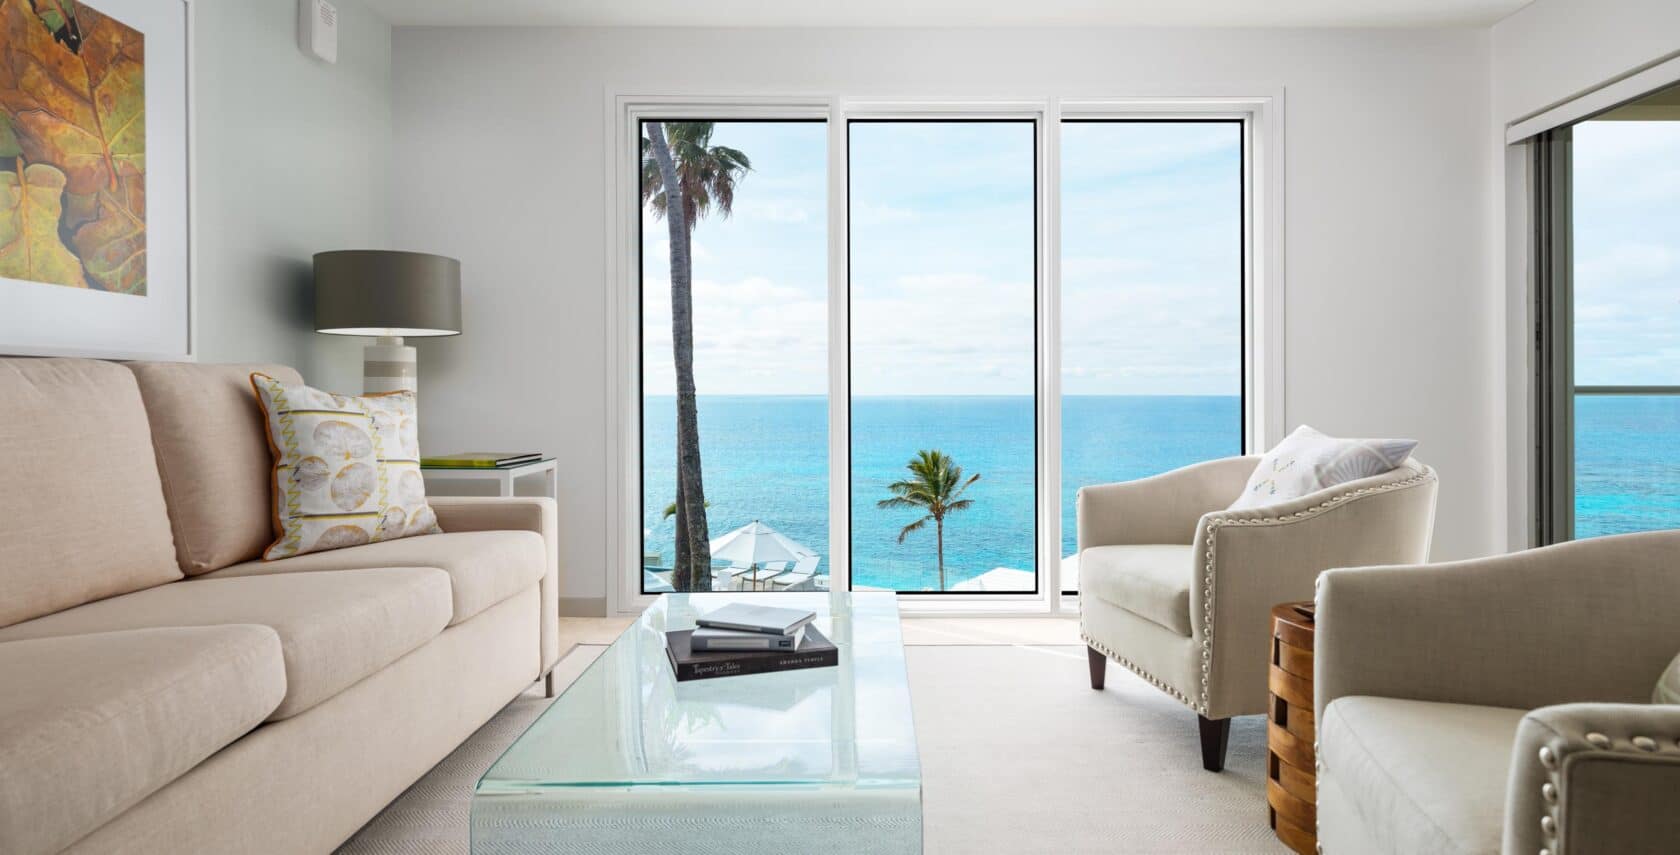 A living area with couches, a glass coffee table, and glass doors with an ocean view.